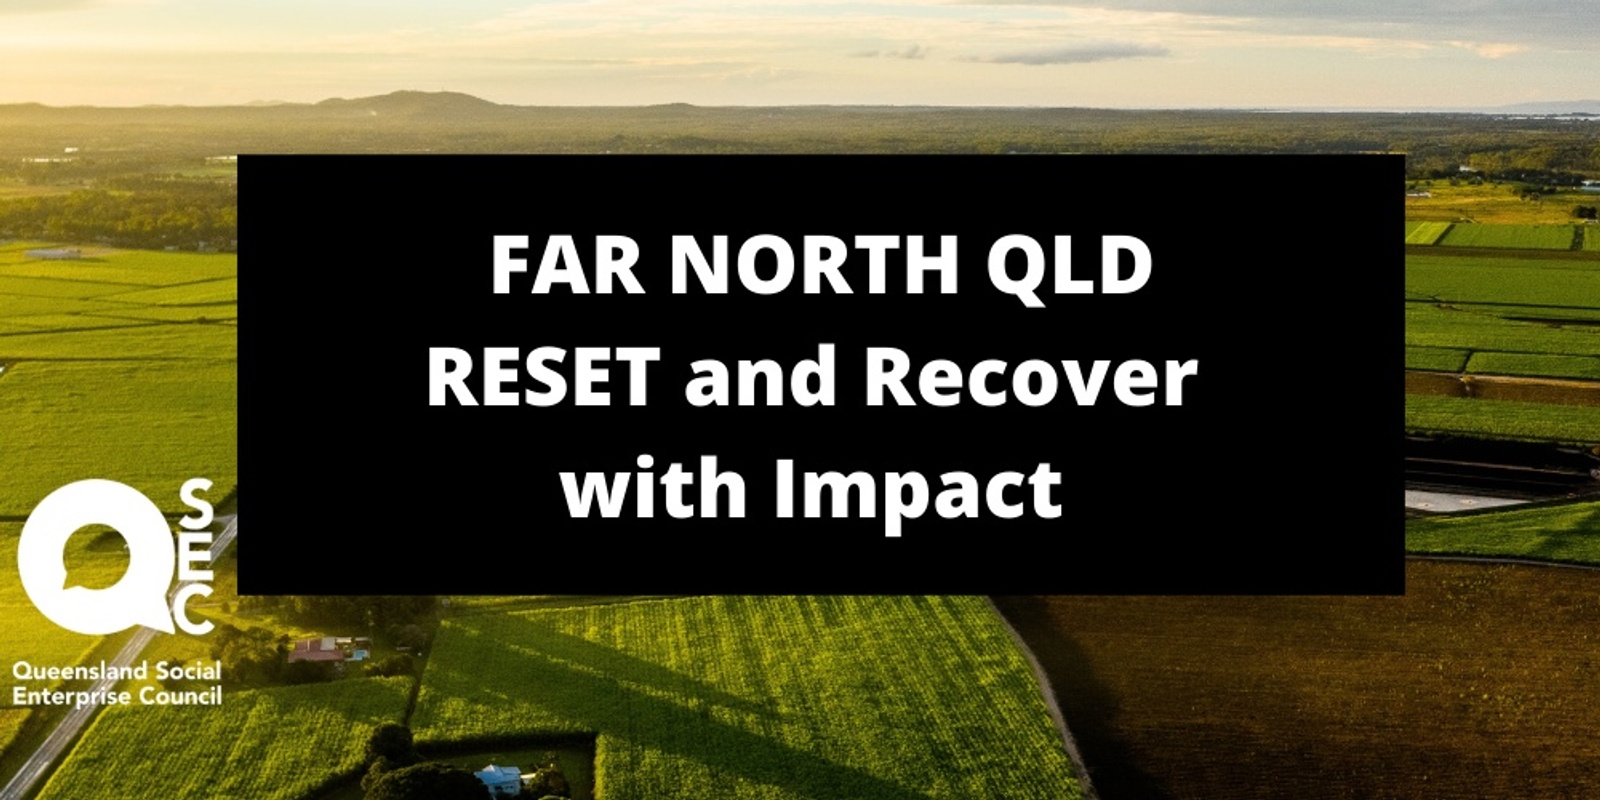 Banner image for RESET with IMPACT Far North Qld Qsocent